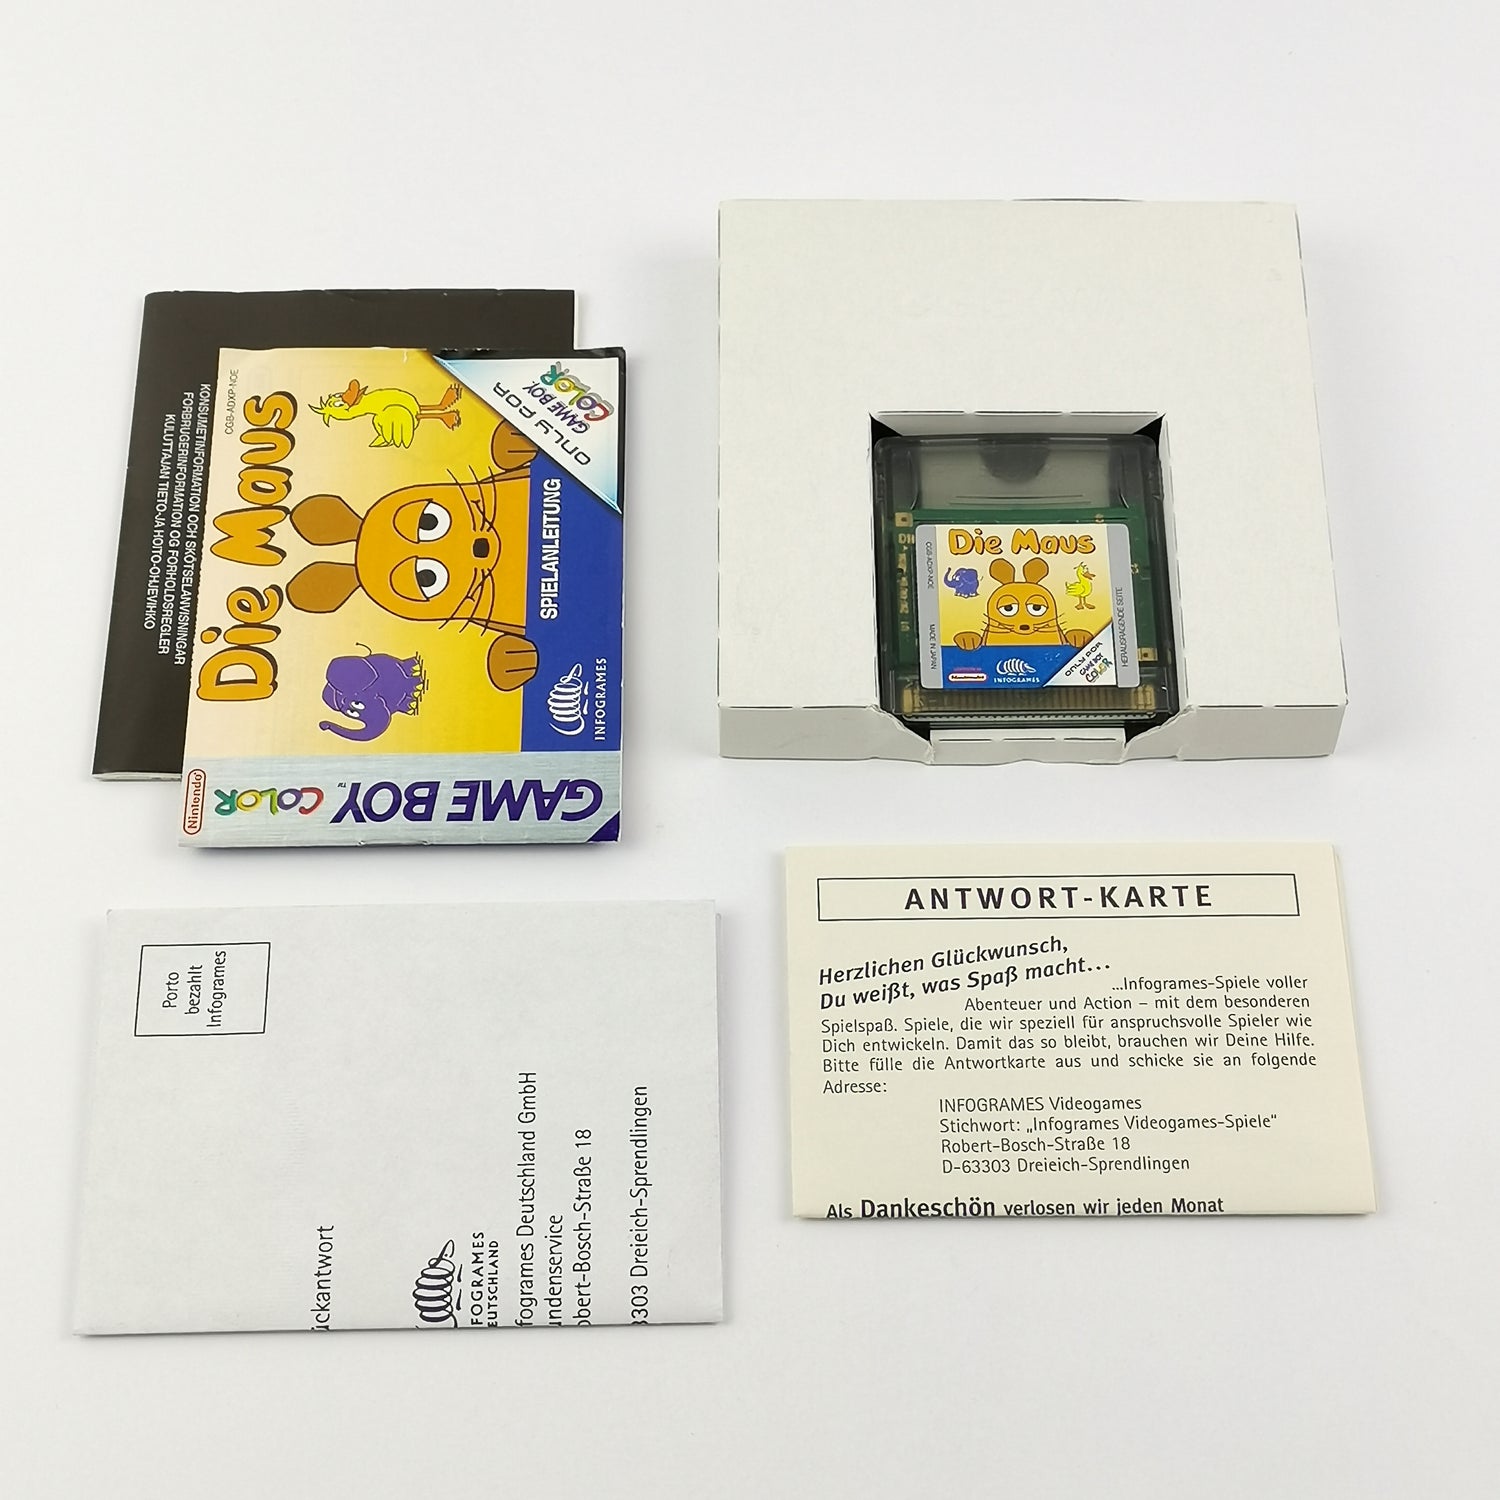 Nintendo Game Boy Color Game: The Mouse - OVP & Instructions PAL | GBC cartridge